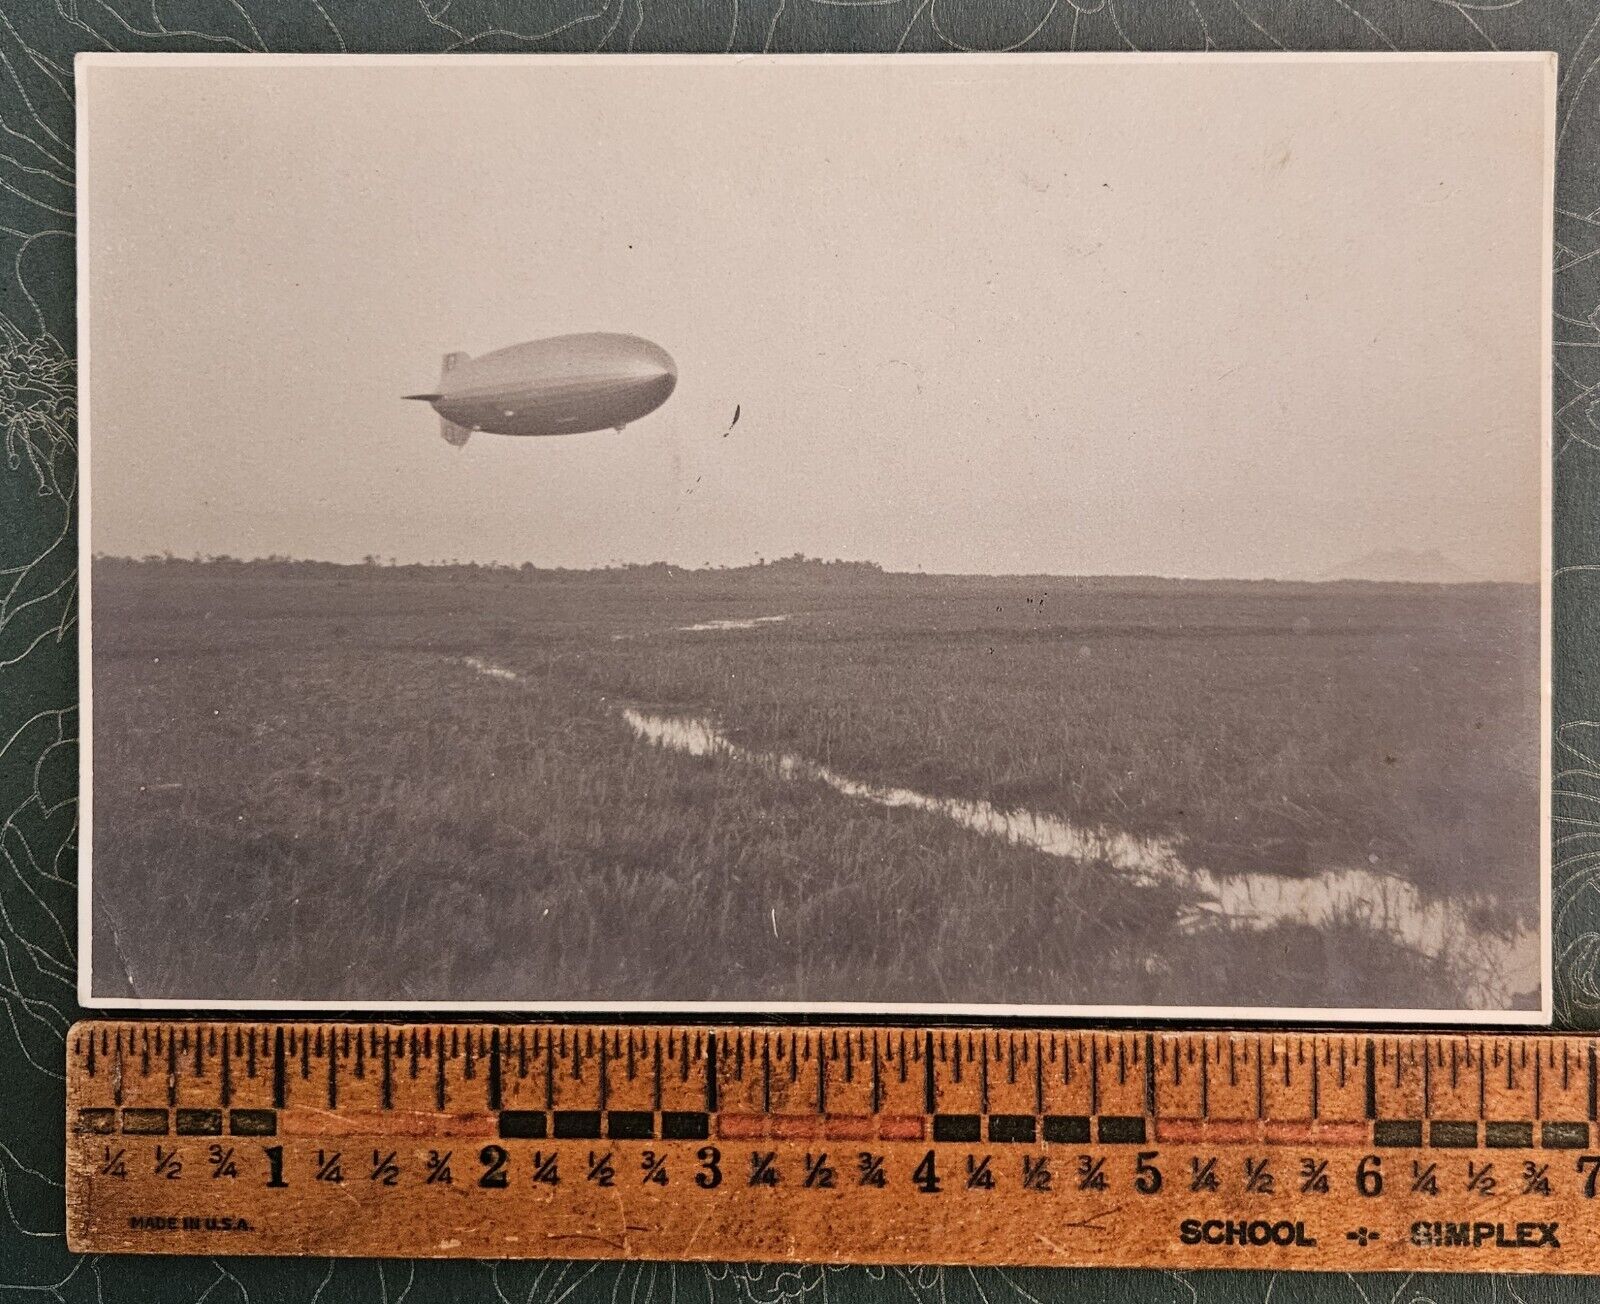 Vintage Early Rare Photograph of the Hindenburg over Germany Agra-Brovira Paper